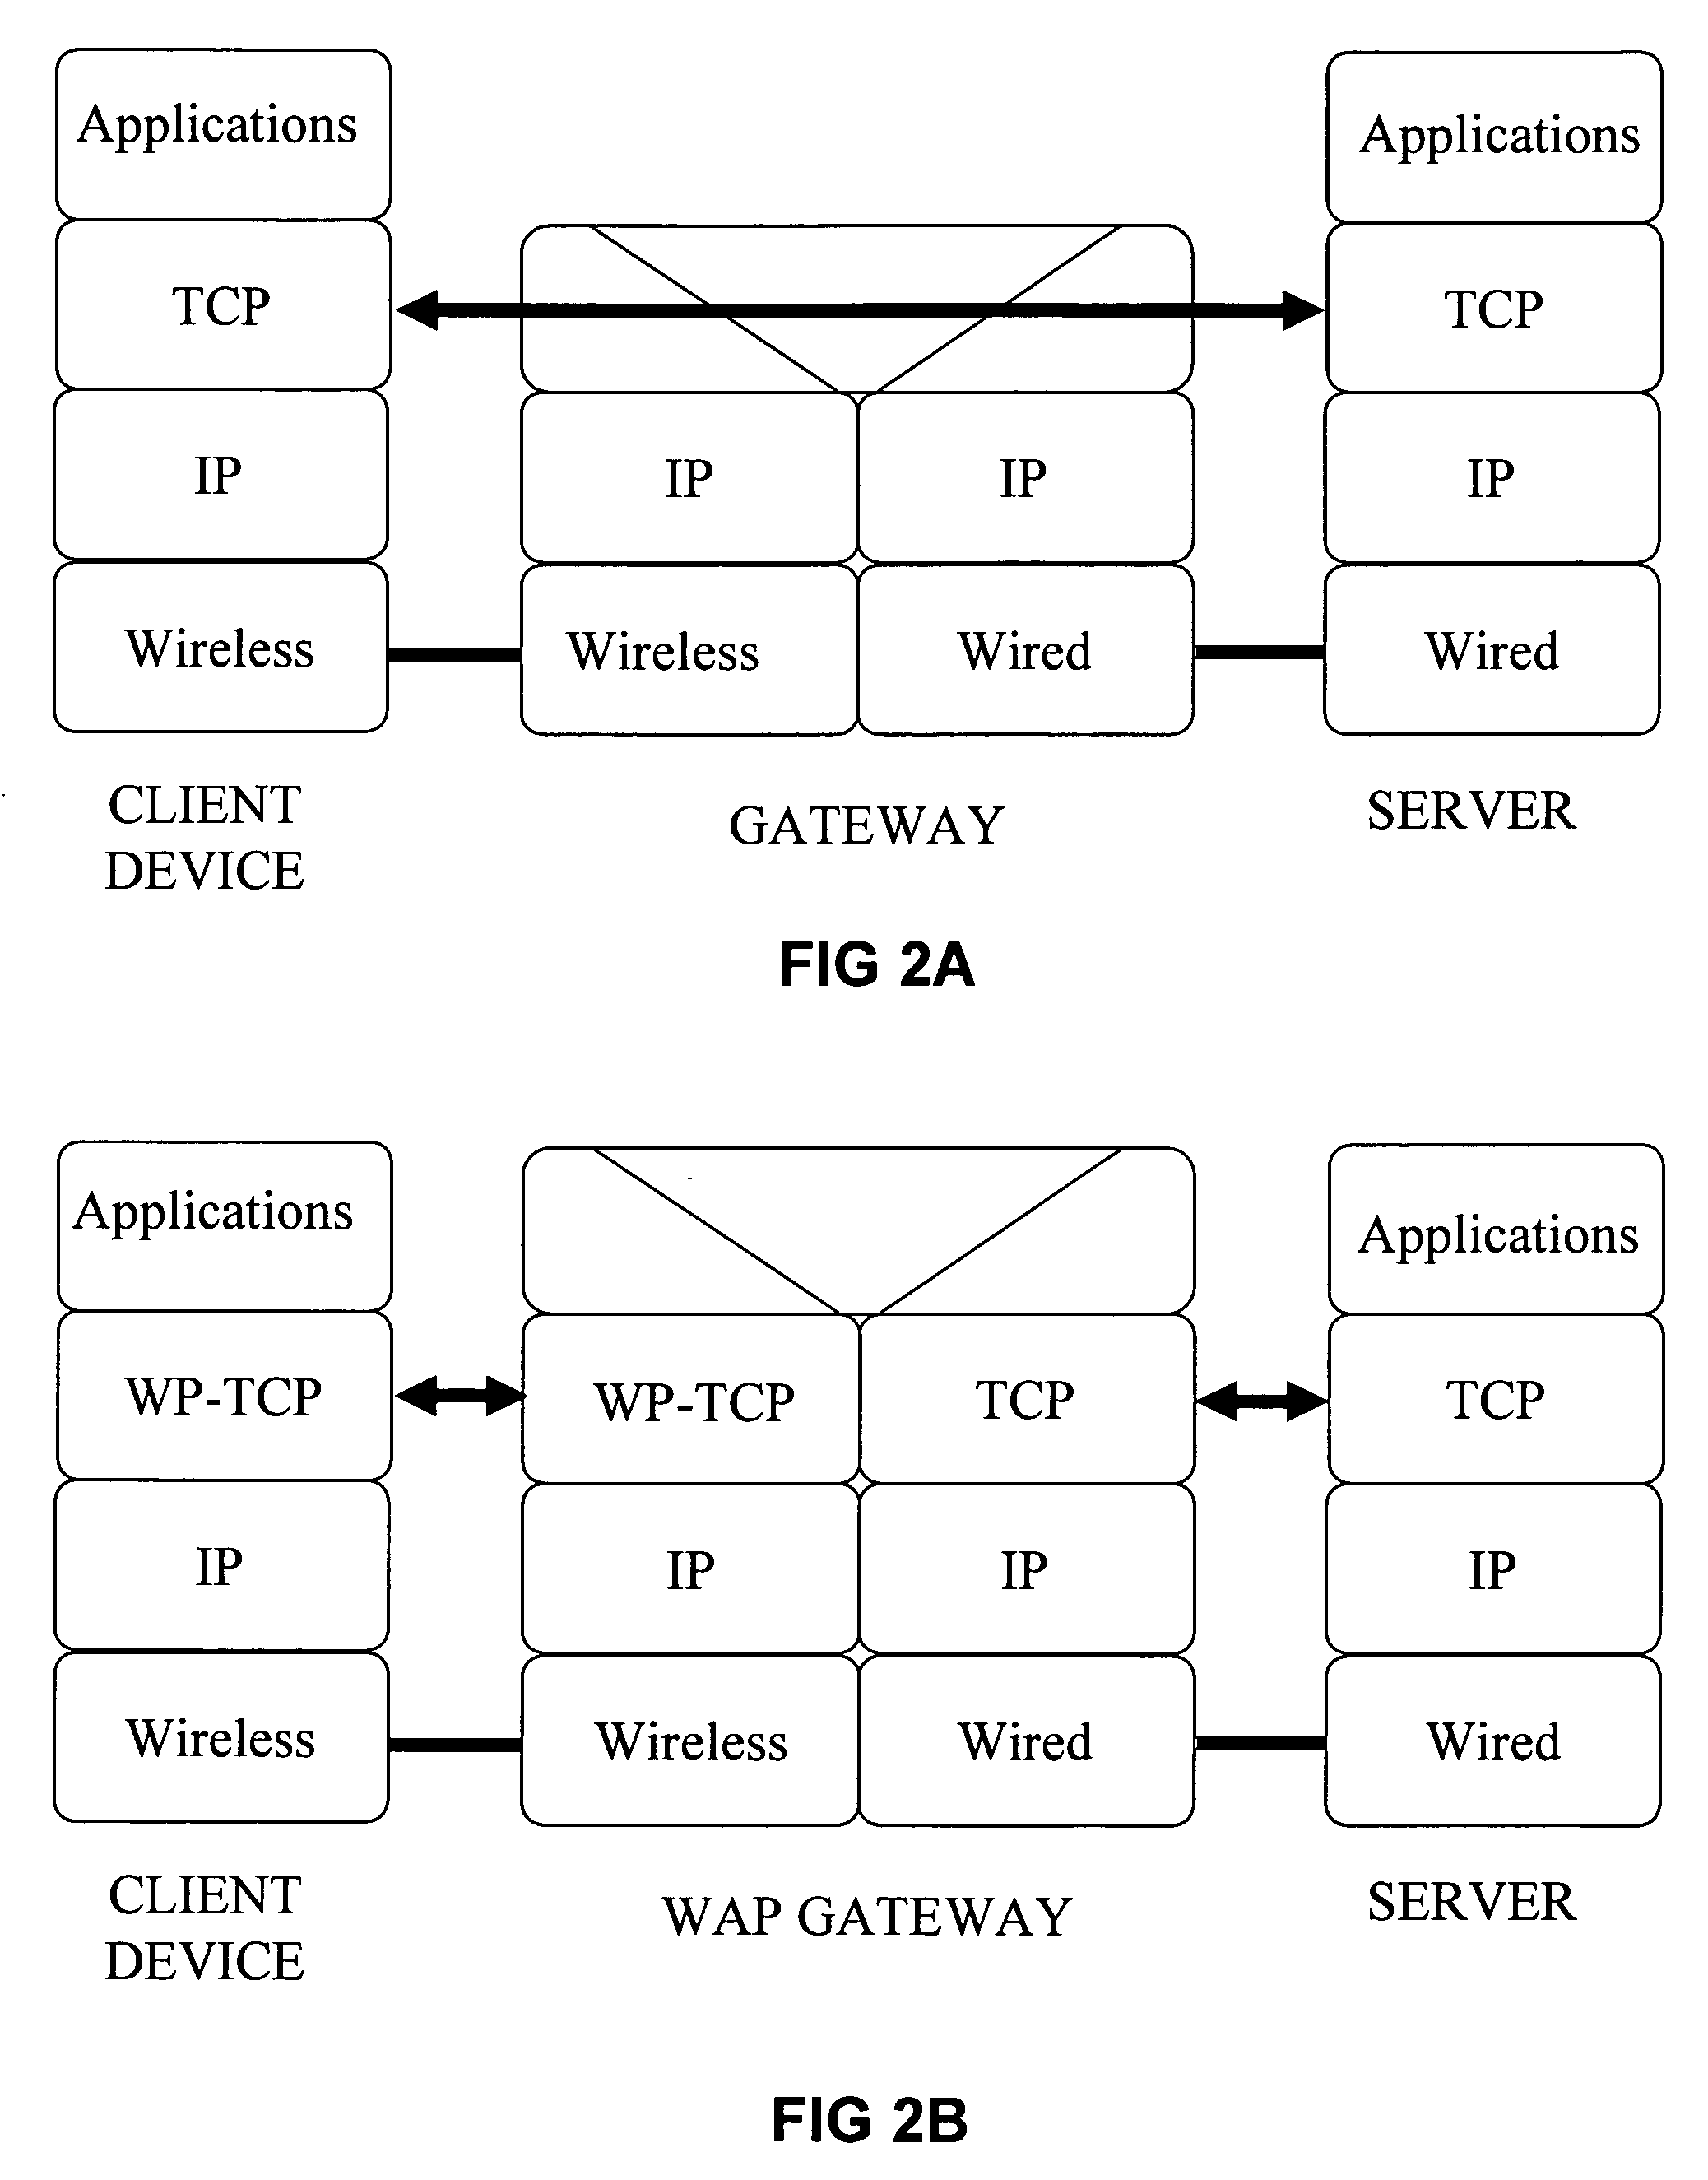 Connection-oriented data transfer over wireless transmission paths